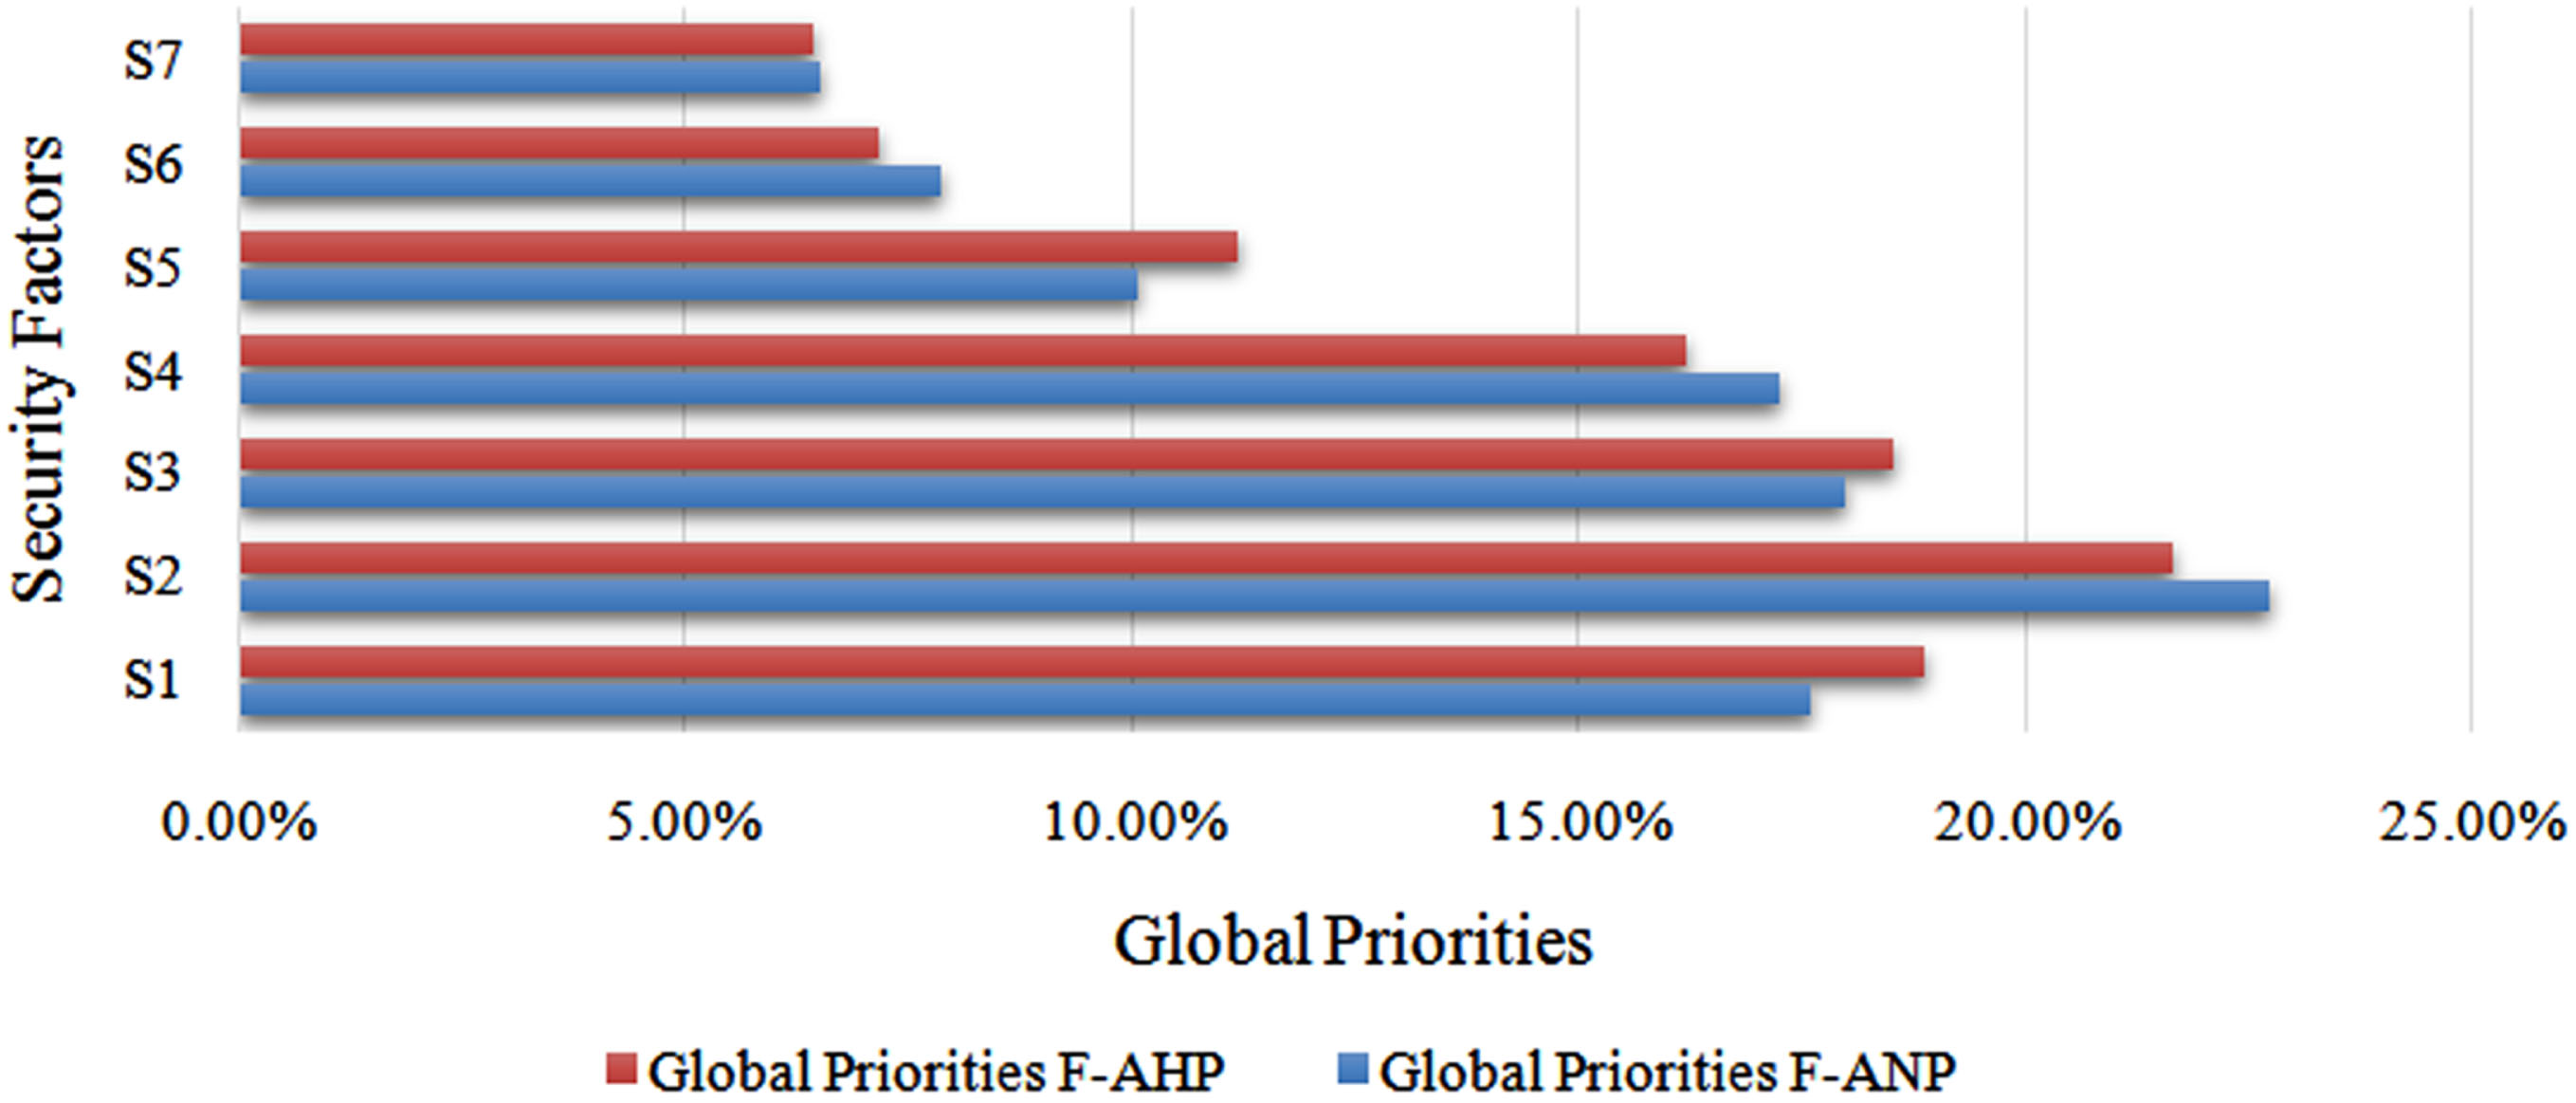 Comparison of global priorities of the affected security factors.